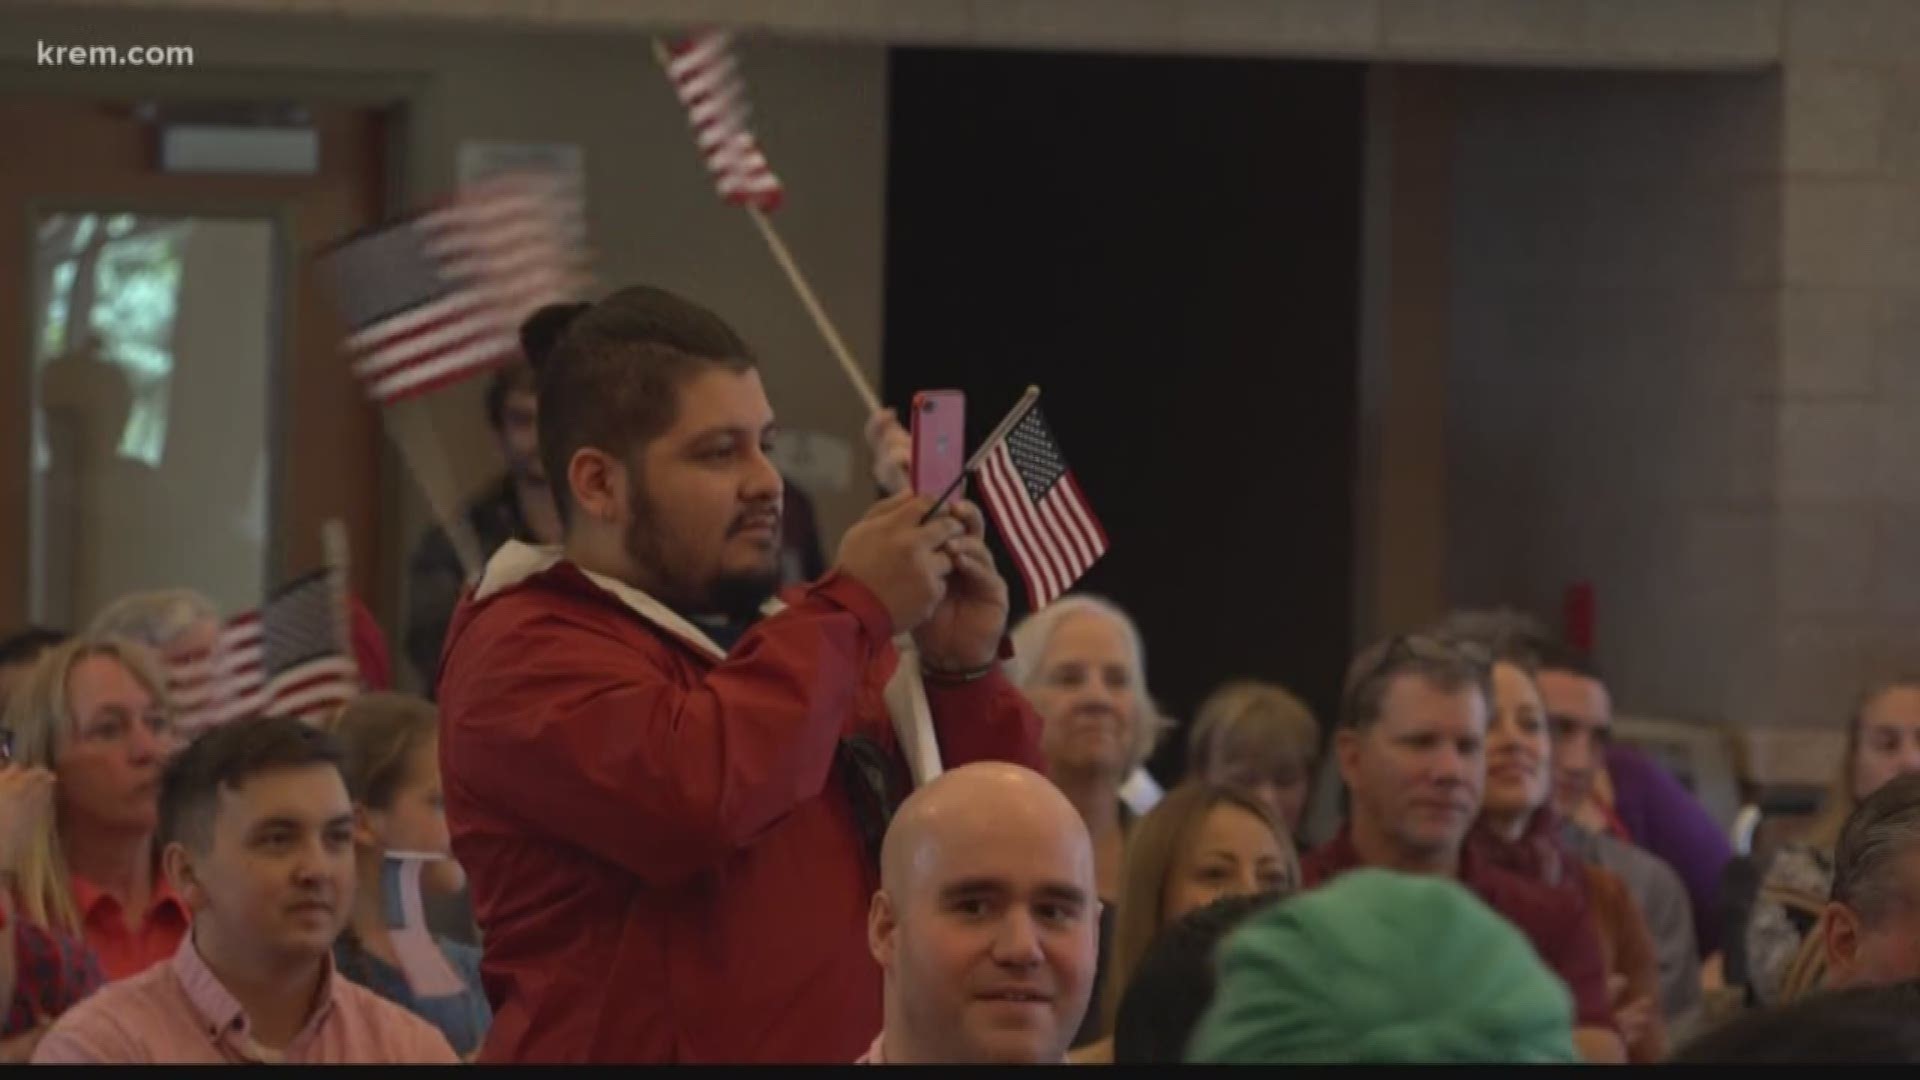 For 97 people from more than 40 counties, Sept. 17 marked the first day of being an American citizen.